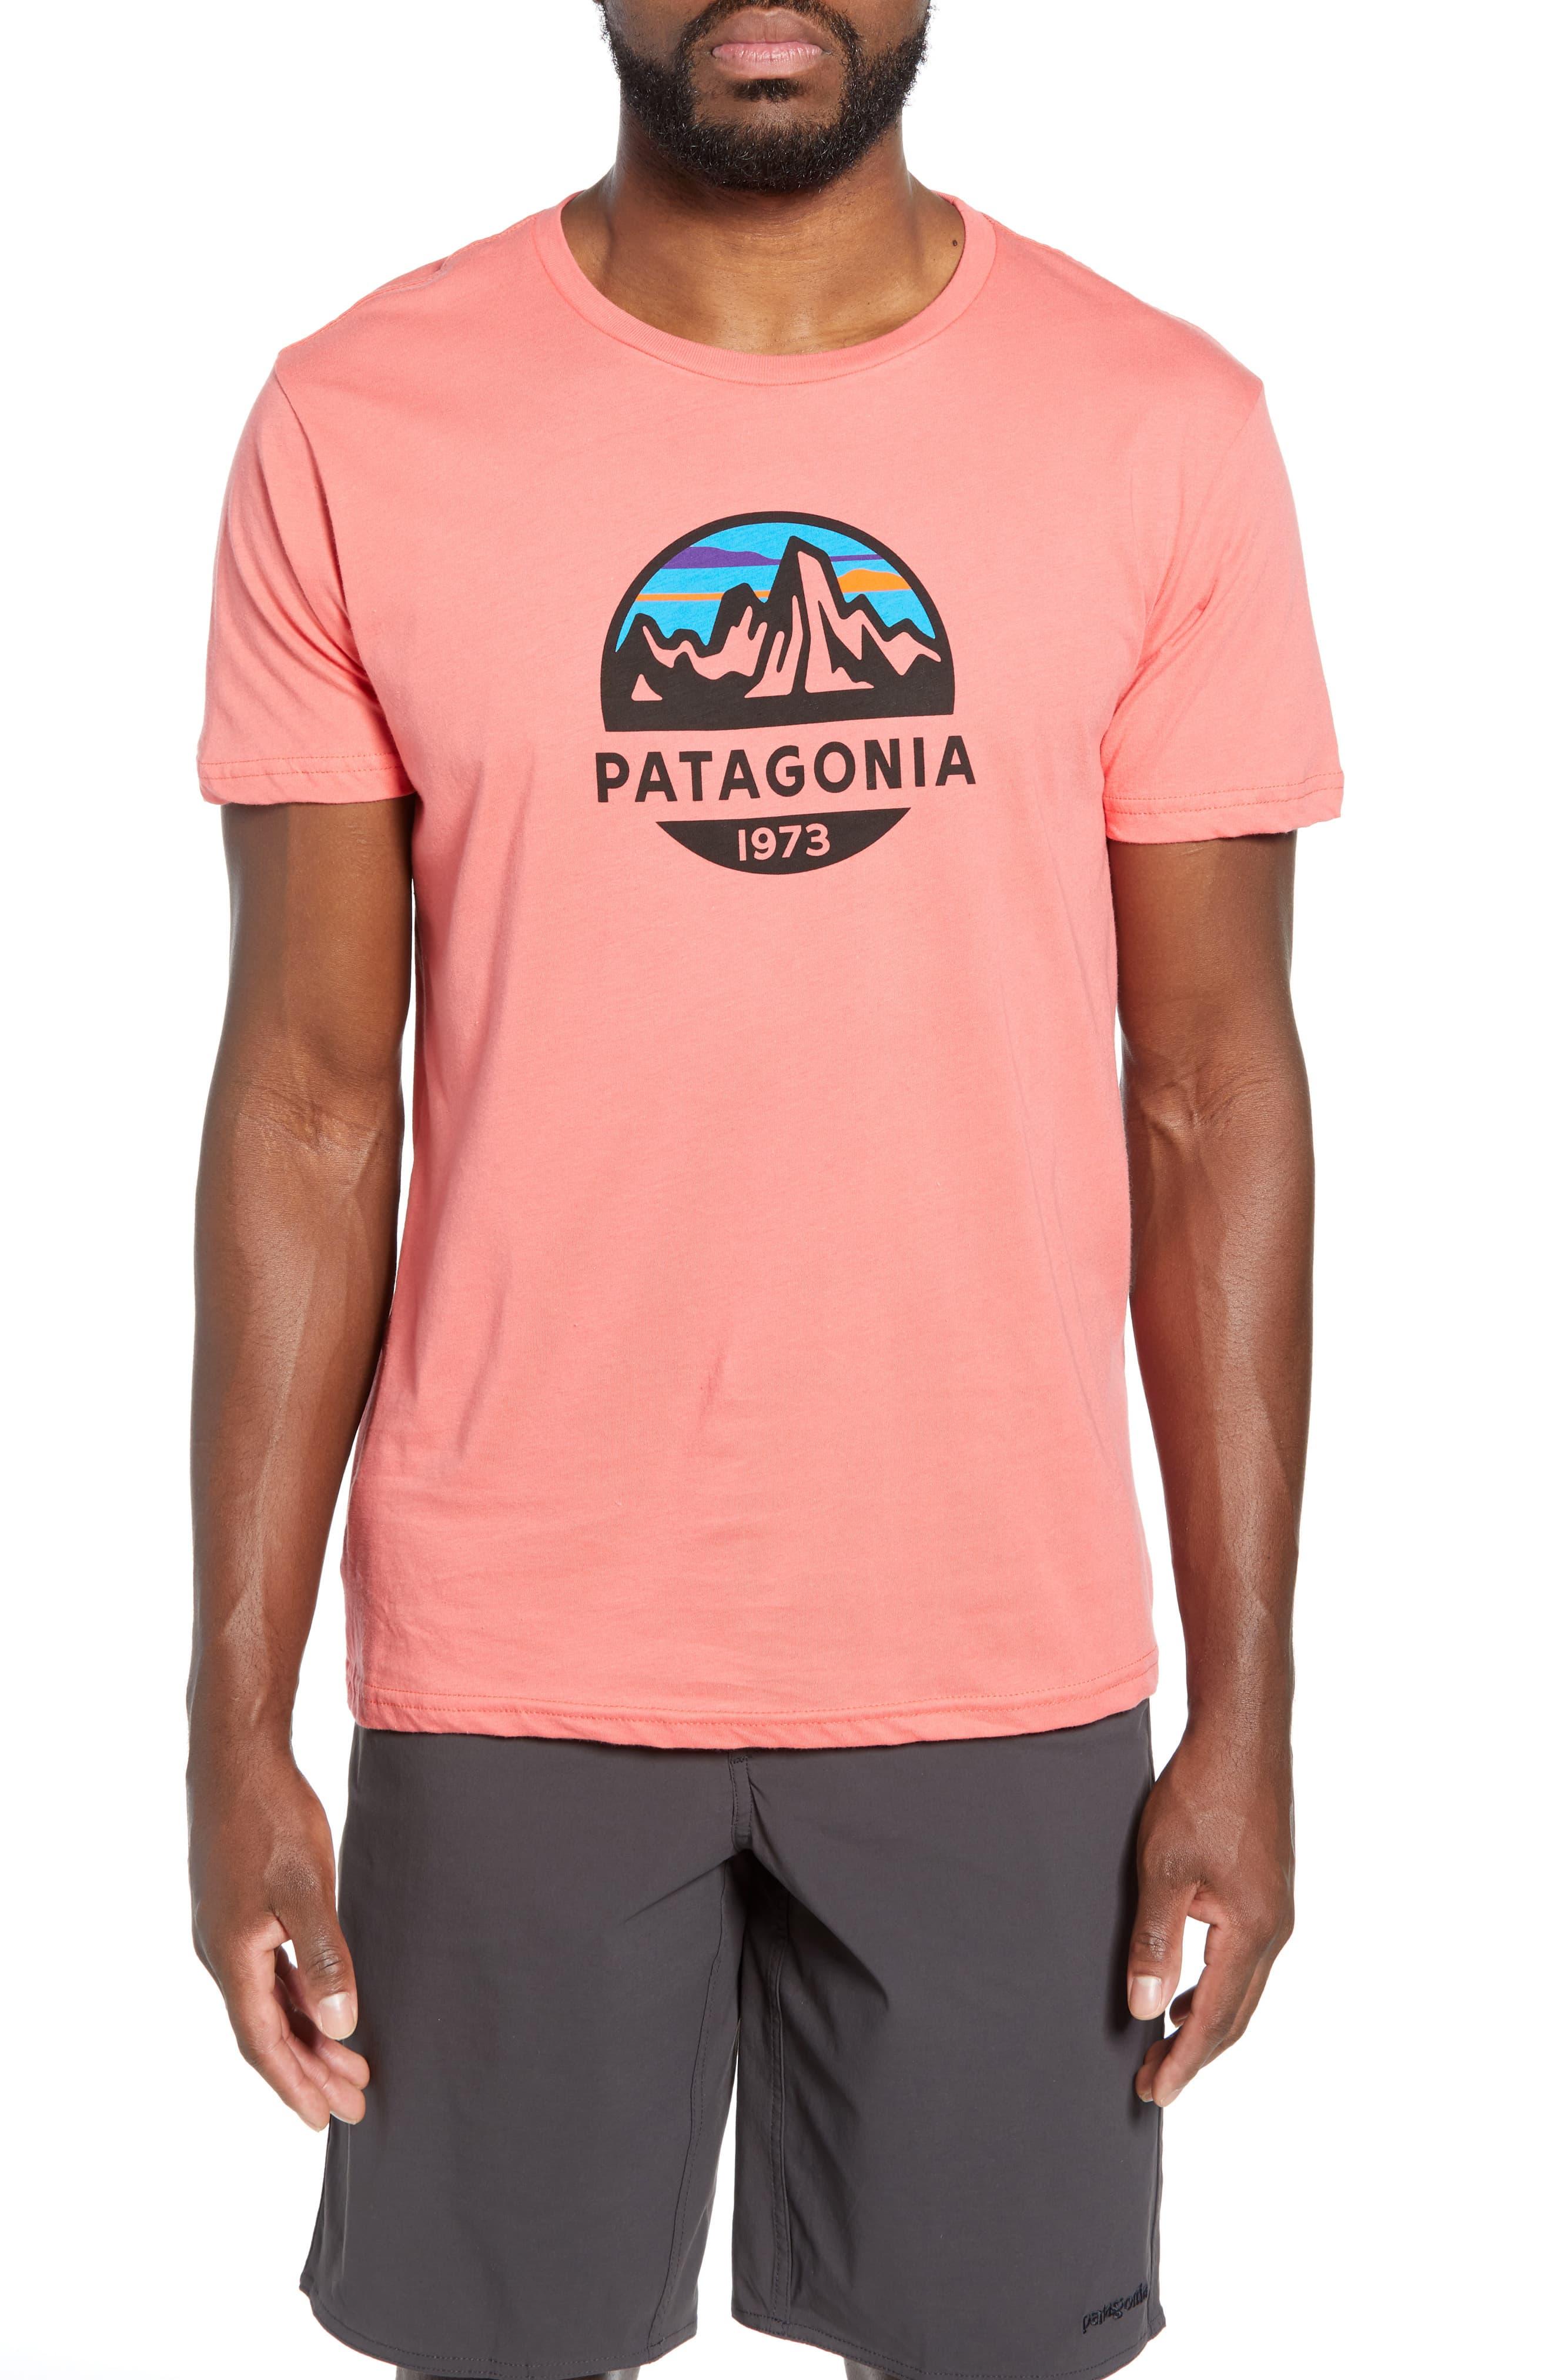 Patagonia Fitz Roy Scope Crewneck T-shirt in Pink for Men - Lyst